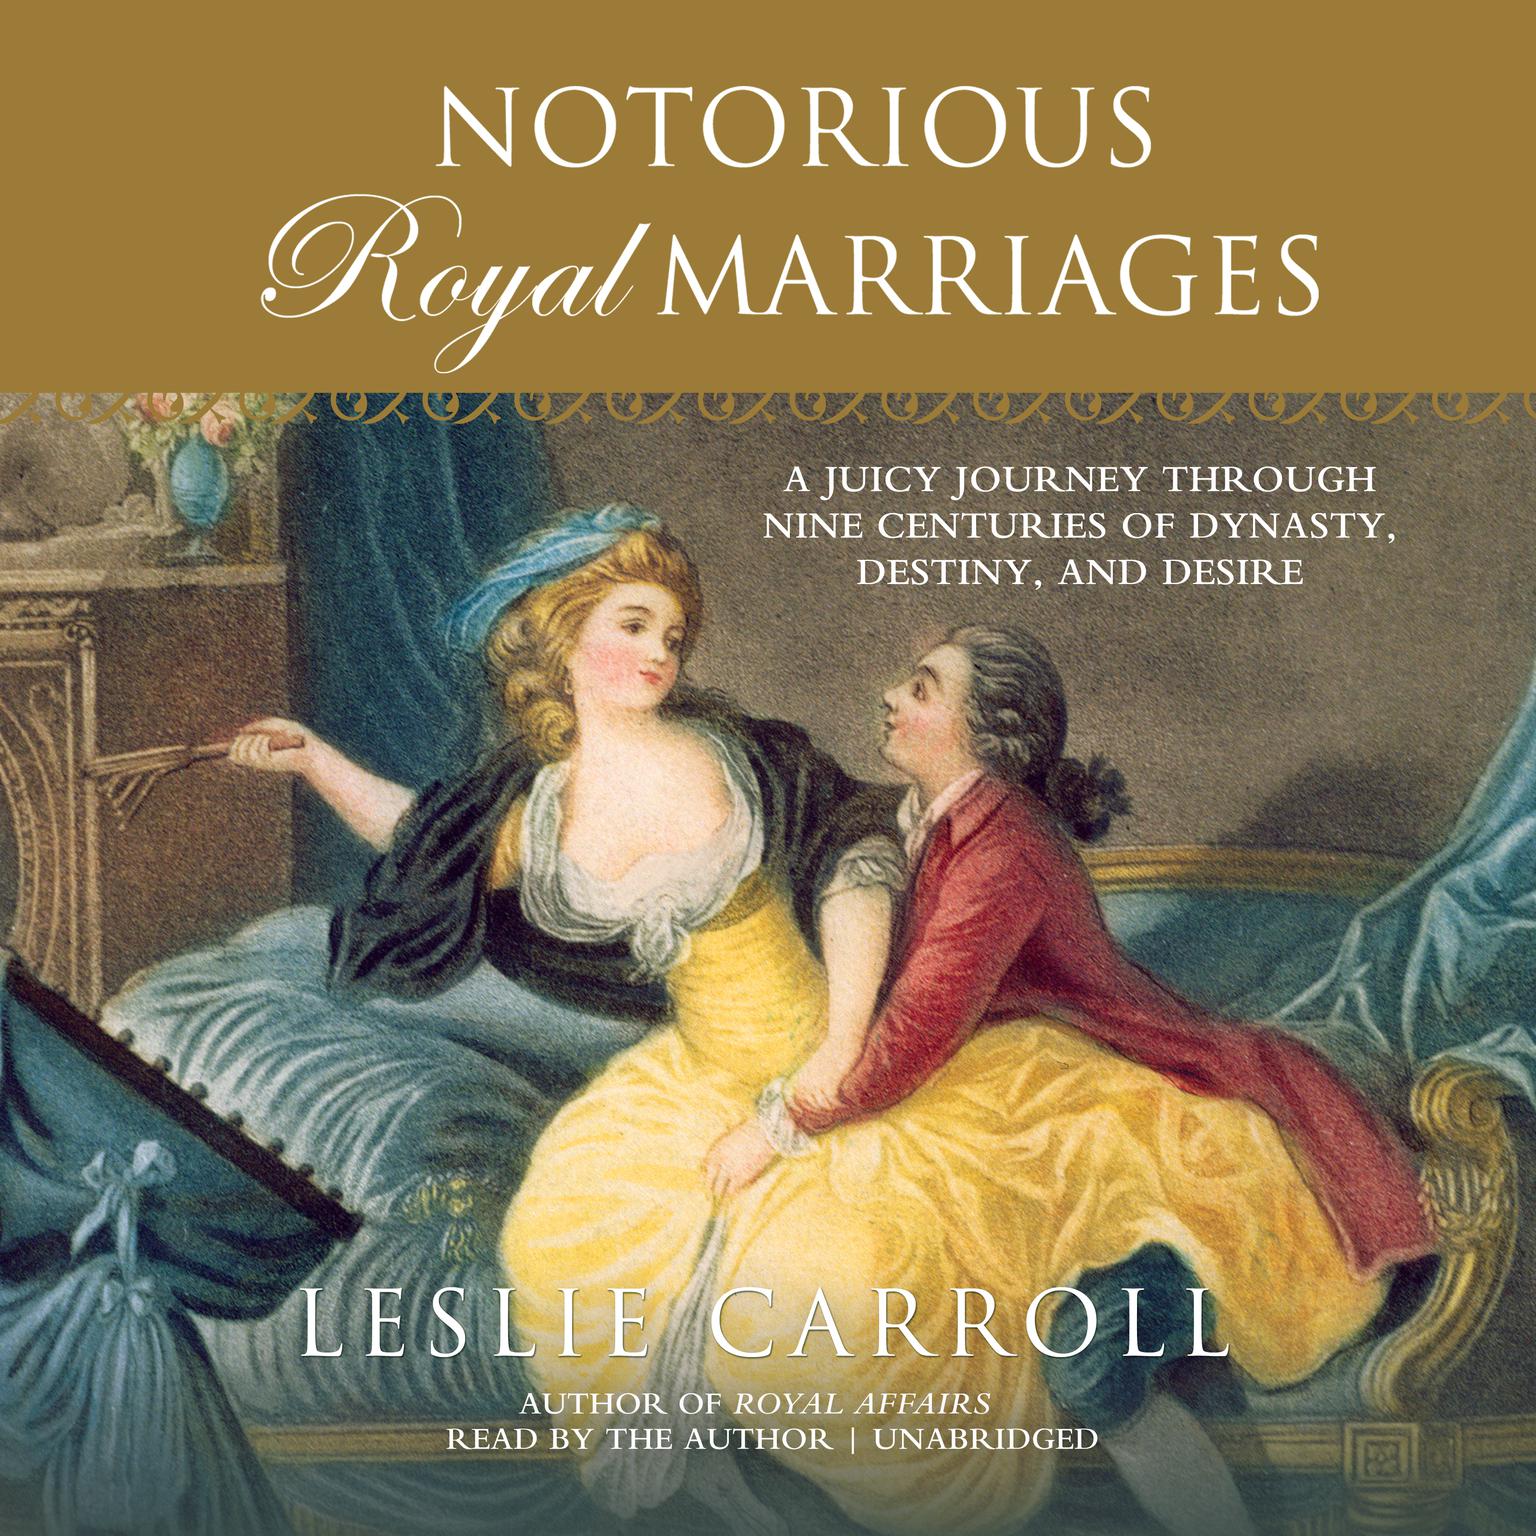 Notorious Royal Marriages: A Juicy Journey Through Nine Centuries of Dynasty, Destiny, and Desire Audiobook, by Leslie Carroll